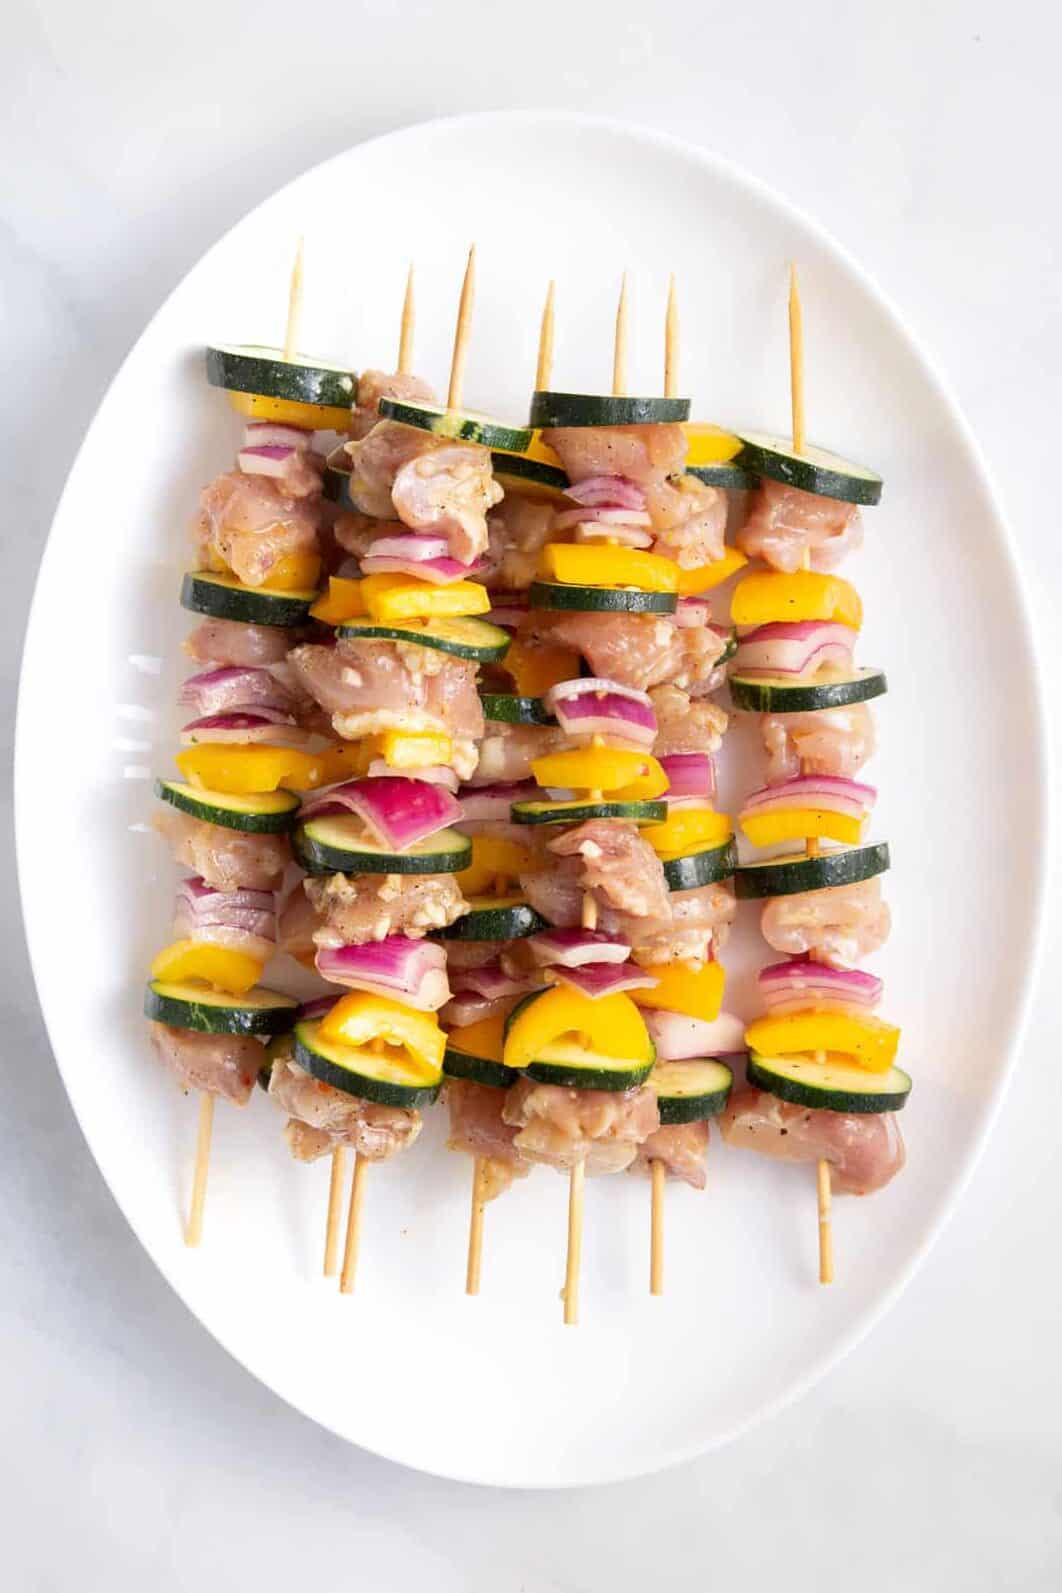 prepped and uncooked chicken and vegetable kabobs sitting on a white oval plate